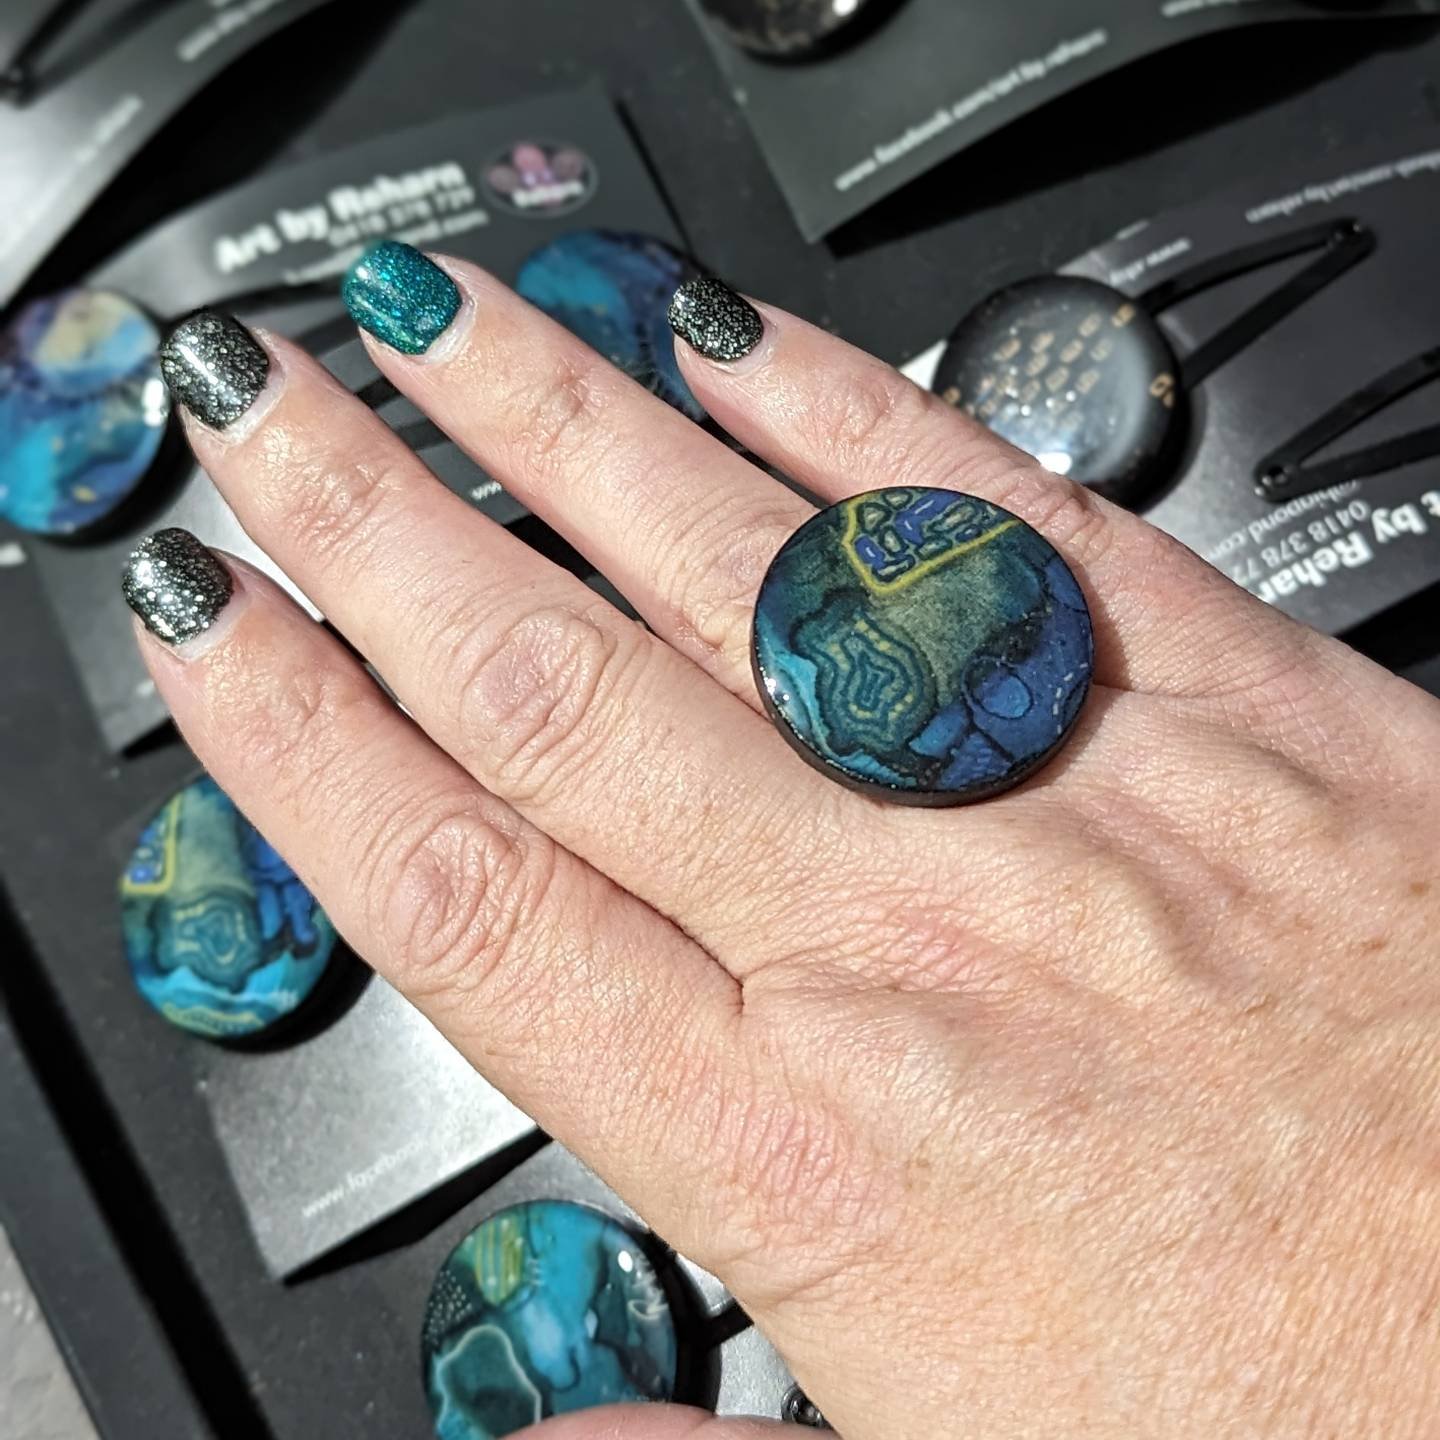 I think I like it!!! 

Tomorrow I will be wearing a prototype ring, made from my artwork!  I will have a limited few new items, including the original artwork at the @nichemarketbazaar 

Many people have commented they can't afford artwork, but would